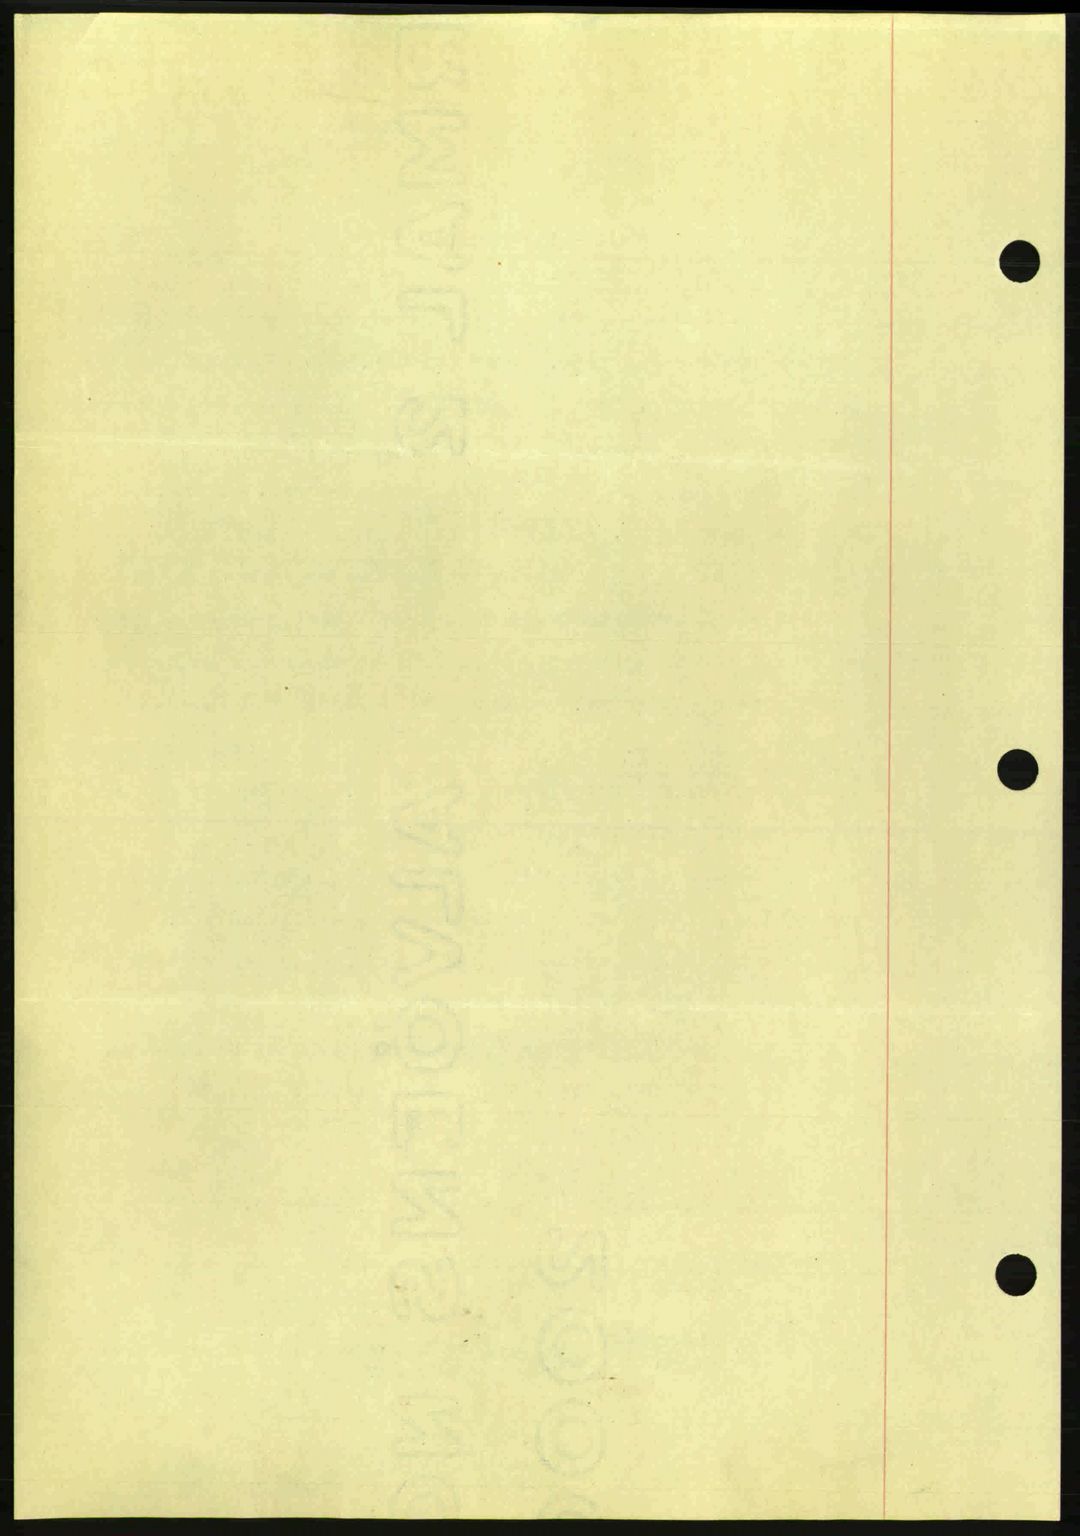 Indre Sogn tingrett, SAB/A-3301/1/G/Gb/Gba/L0030: Mortgage book no. 30, 1935-1937, Deed date: 17.08.1936